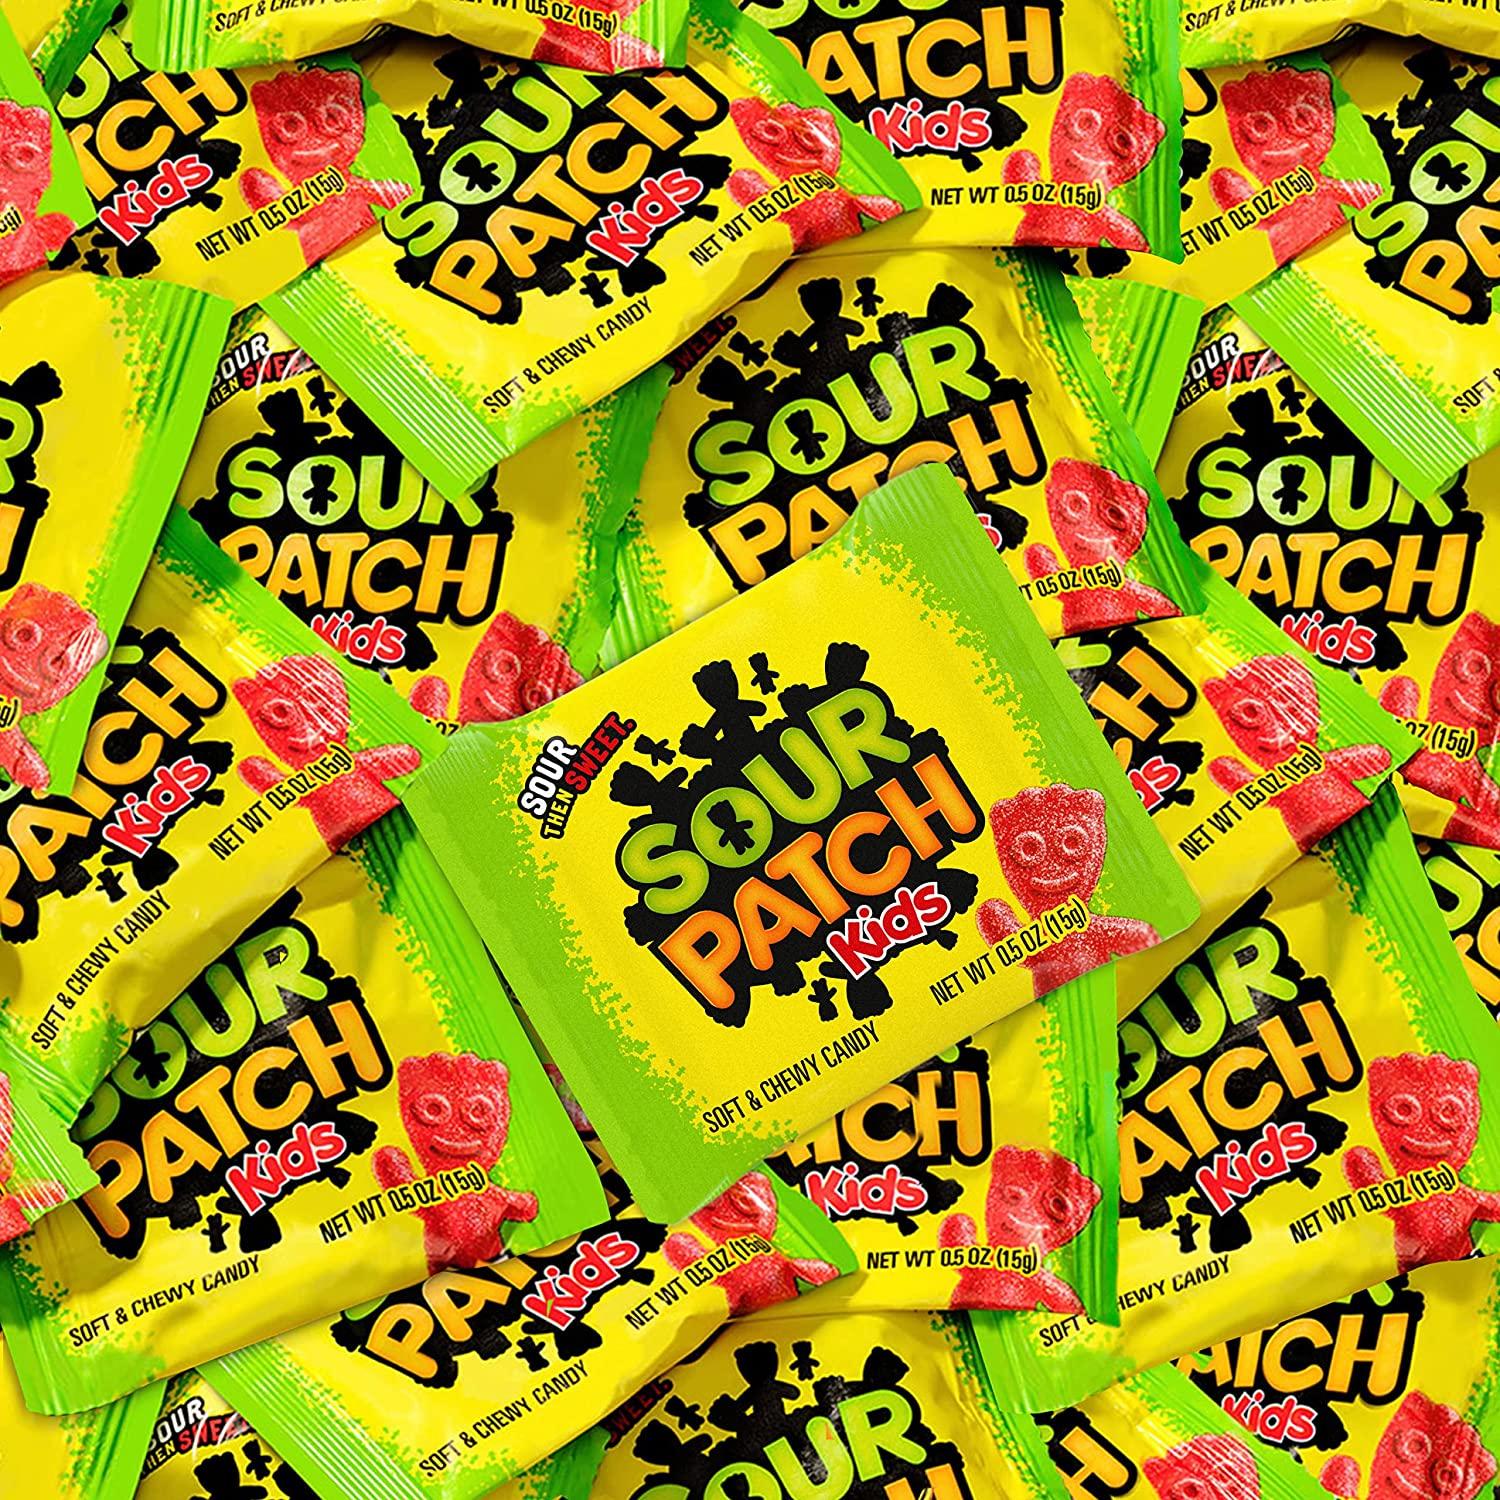 SOUR PATCH KIDS Soft & Chewy Candy, Halloween Candy, 24 Count